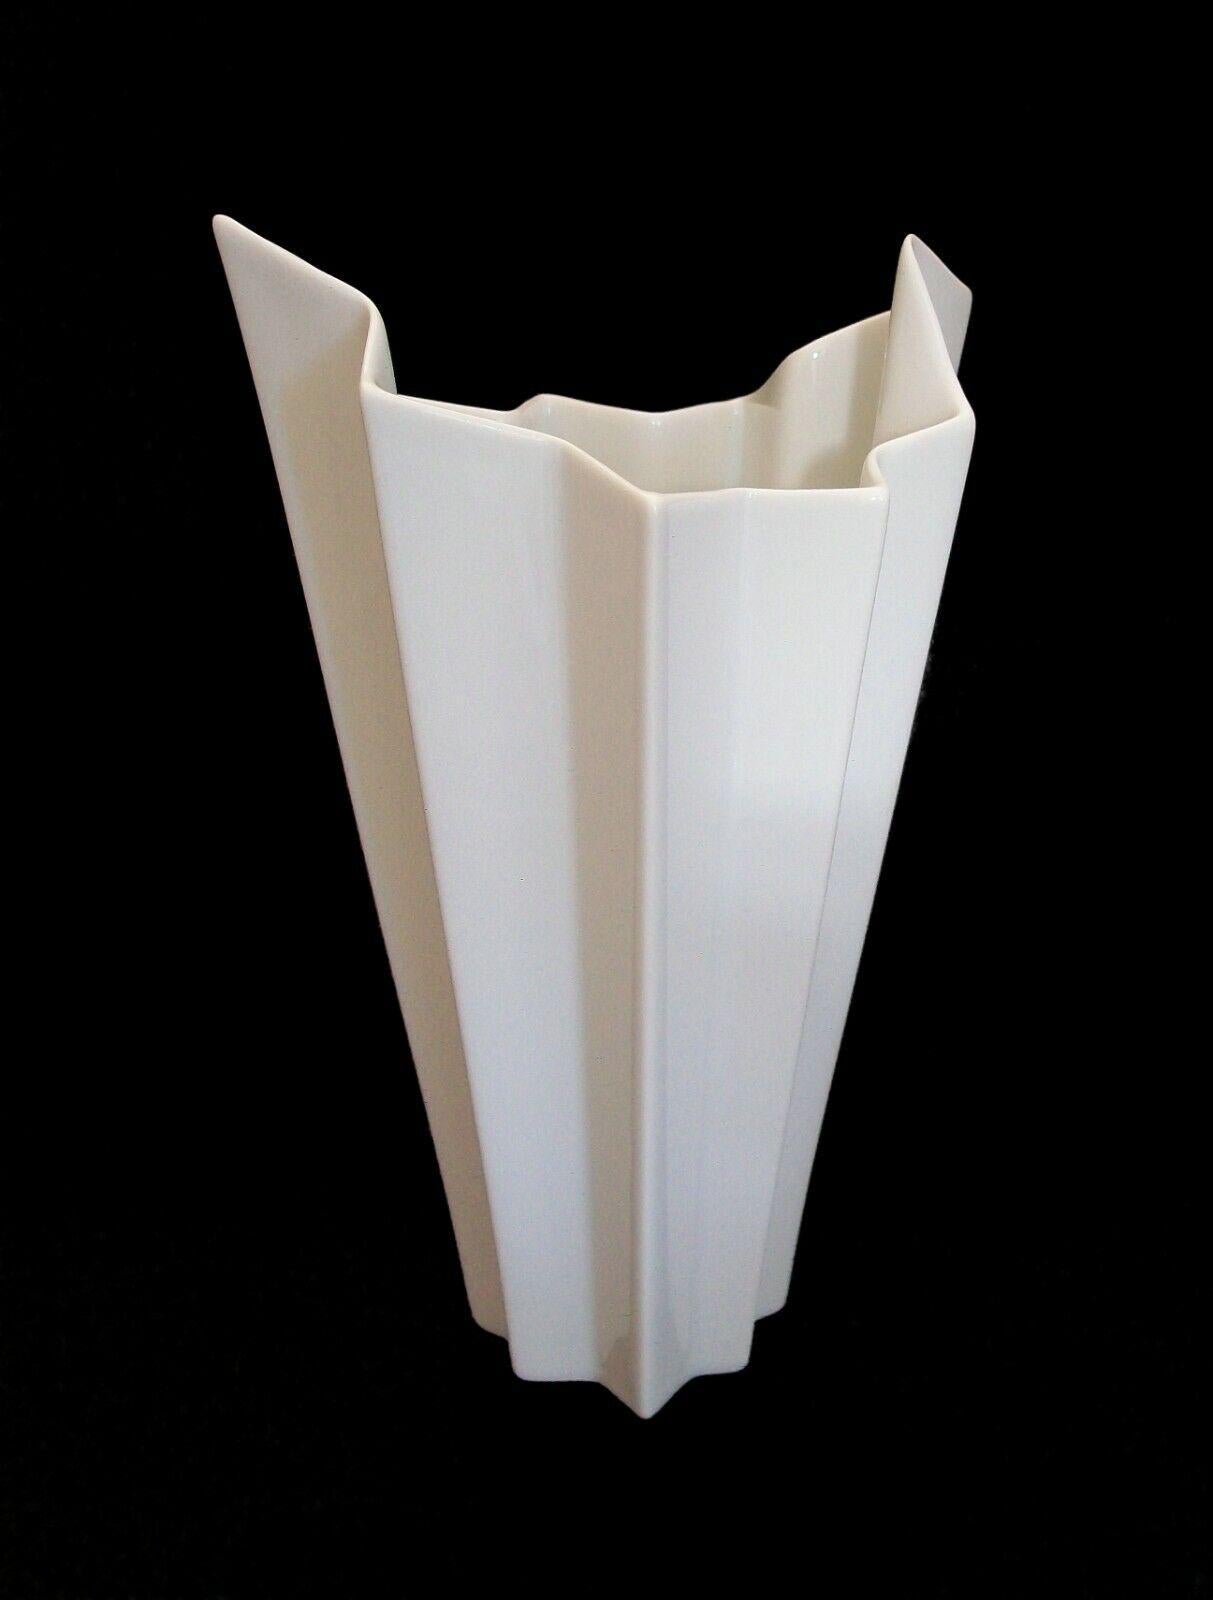 Hutschenreuther (Manufacturer) - Dr. Heinrich Fuchs (Designer) - Mid century porcelain vase - featuring Origami-like folds in the design that play with light and the unique shape - white glaze over-all - signed on the base - Germany - circa